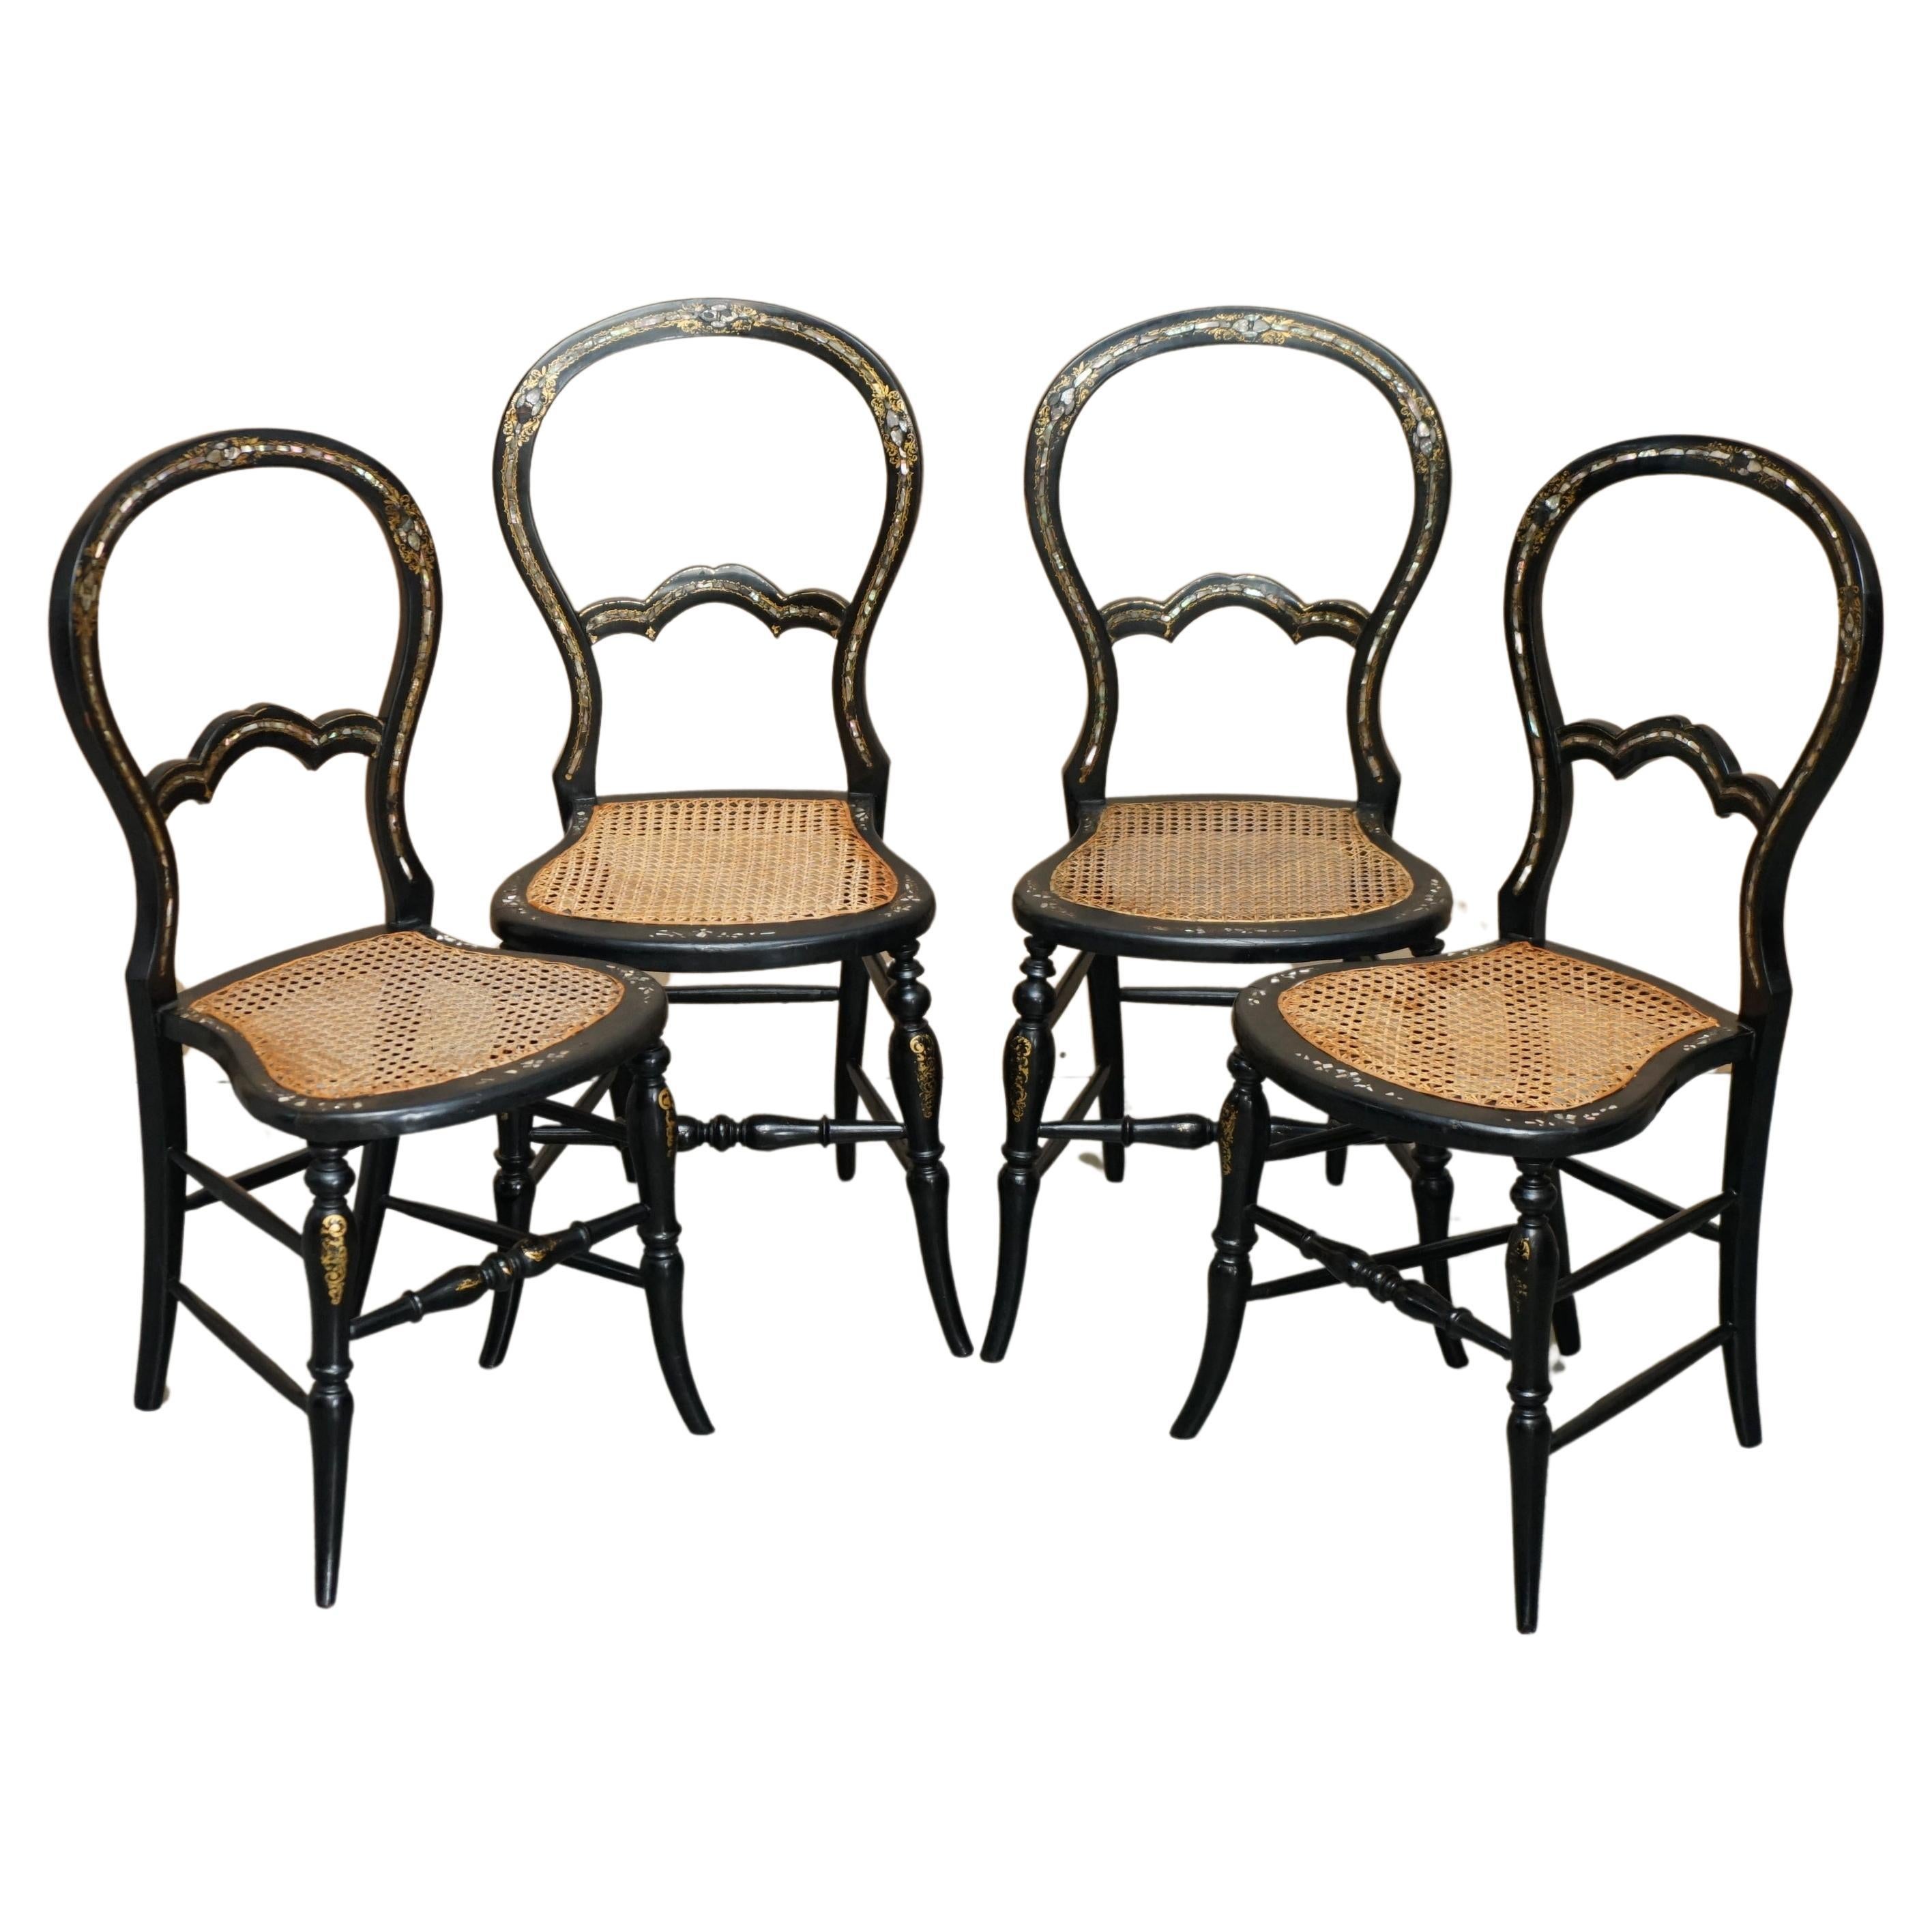 FOUR FINE AND ANTIQUE REGENCY BERGERE MOTHER OF PEARL EBONISED SIDE CHAIRs For Sale